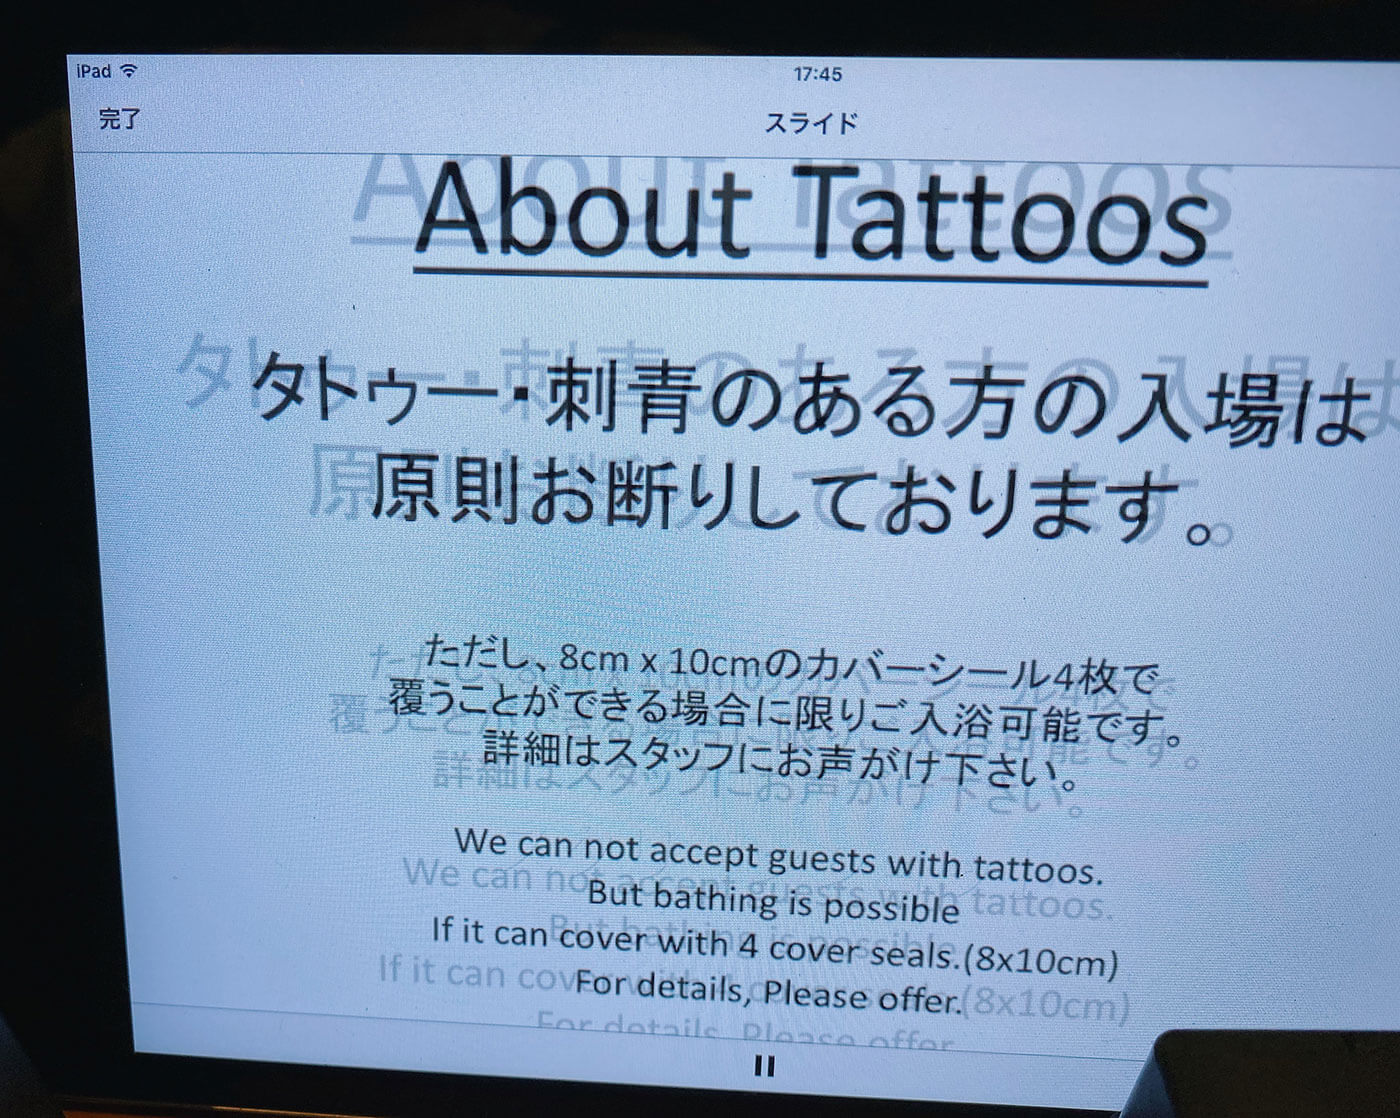 Japan's hot springs rethink tattoo bans for Rugby World Cup - Nikkei Asia